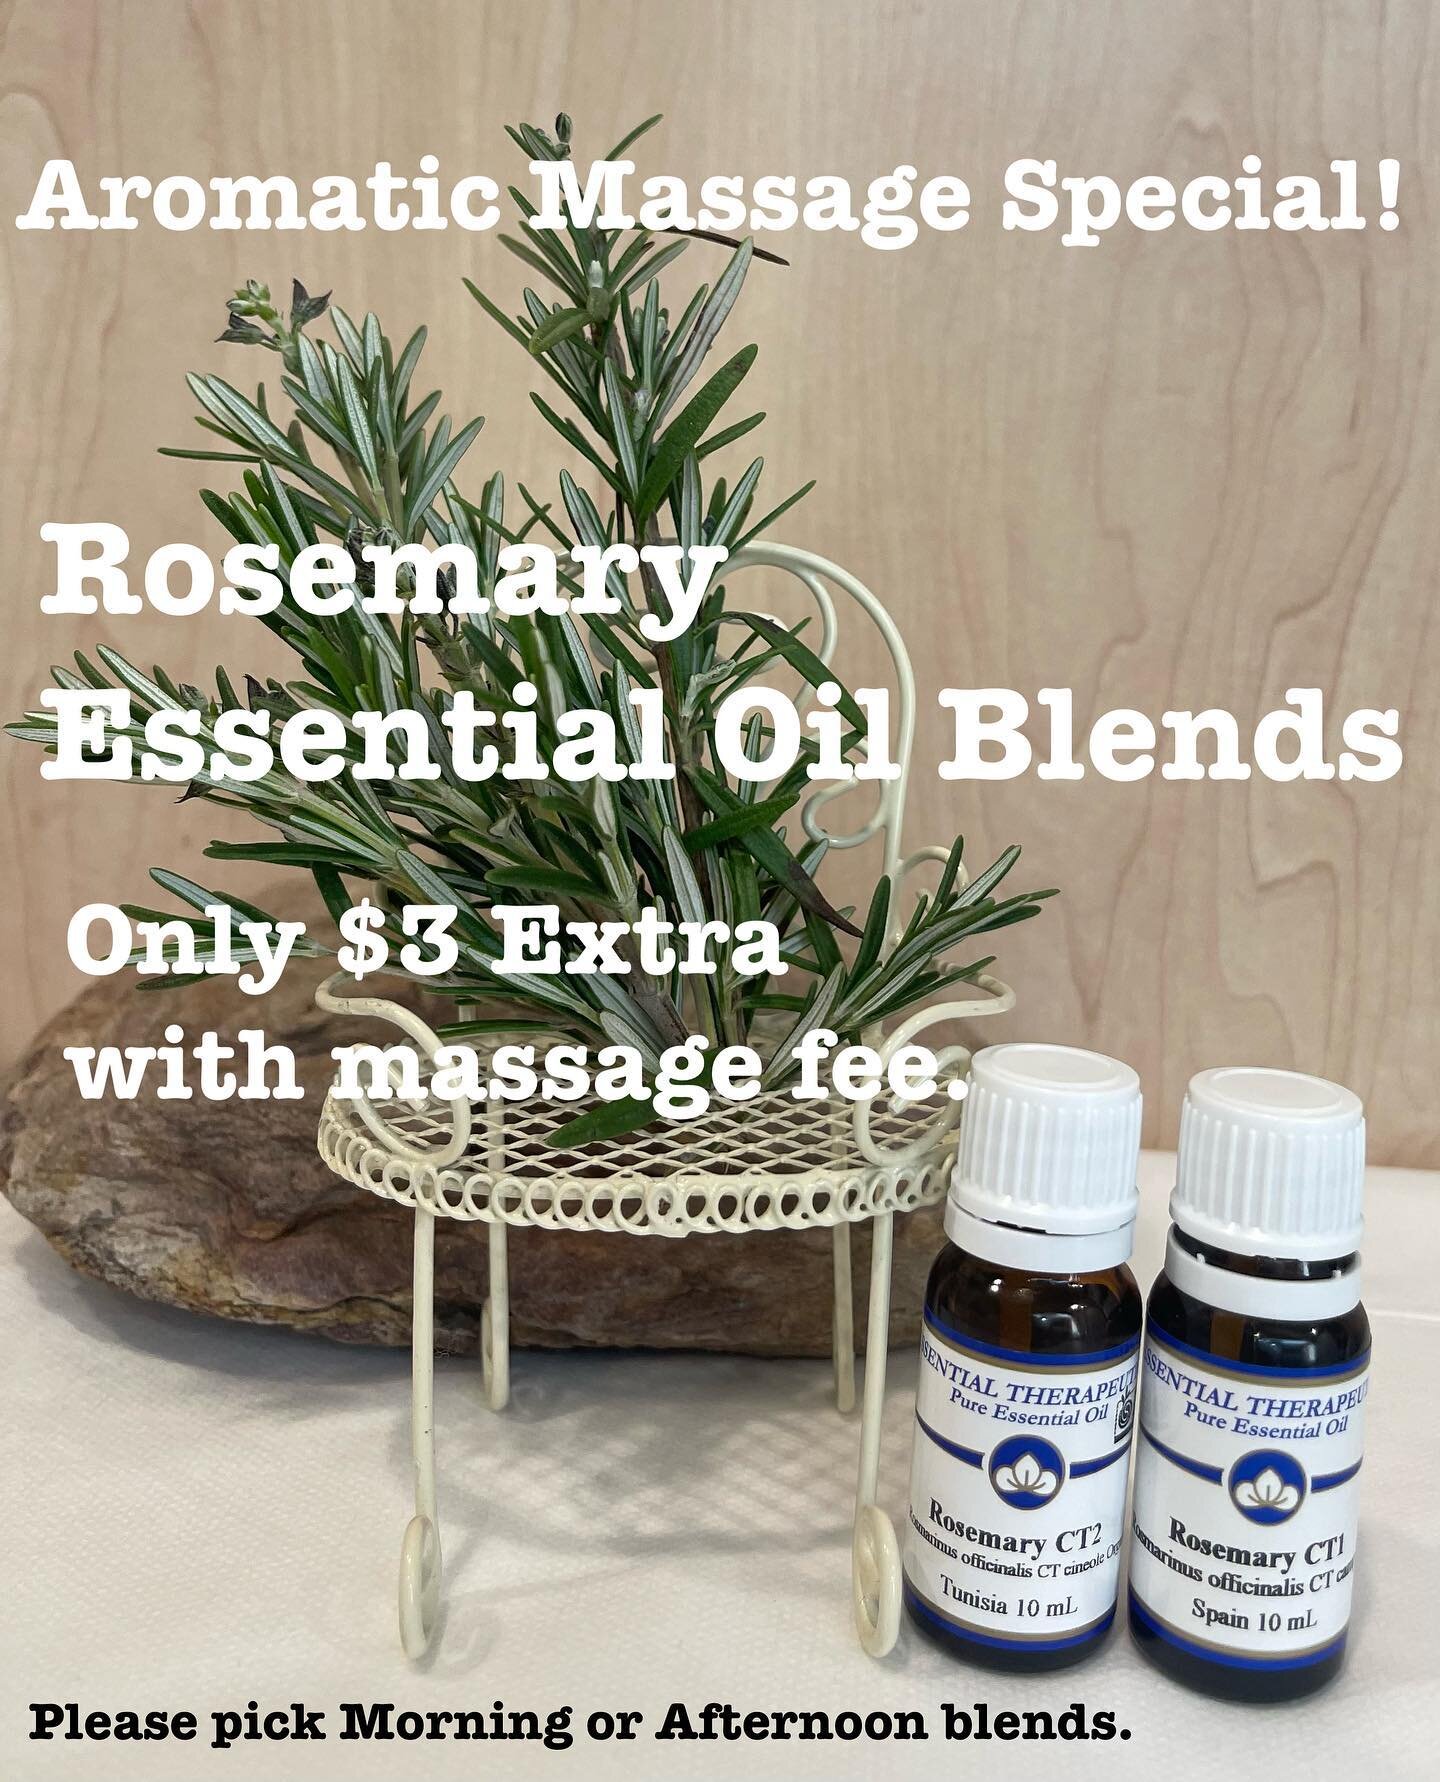 Aromatic Oil Massage Special.  Only $5 extra on Remedial and Relaxation massage! 
Please pick our original Rosemary base essential oil blends, Morning or Afternoon blend.